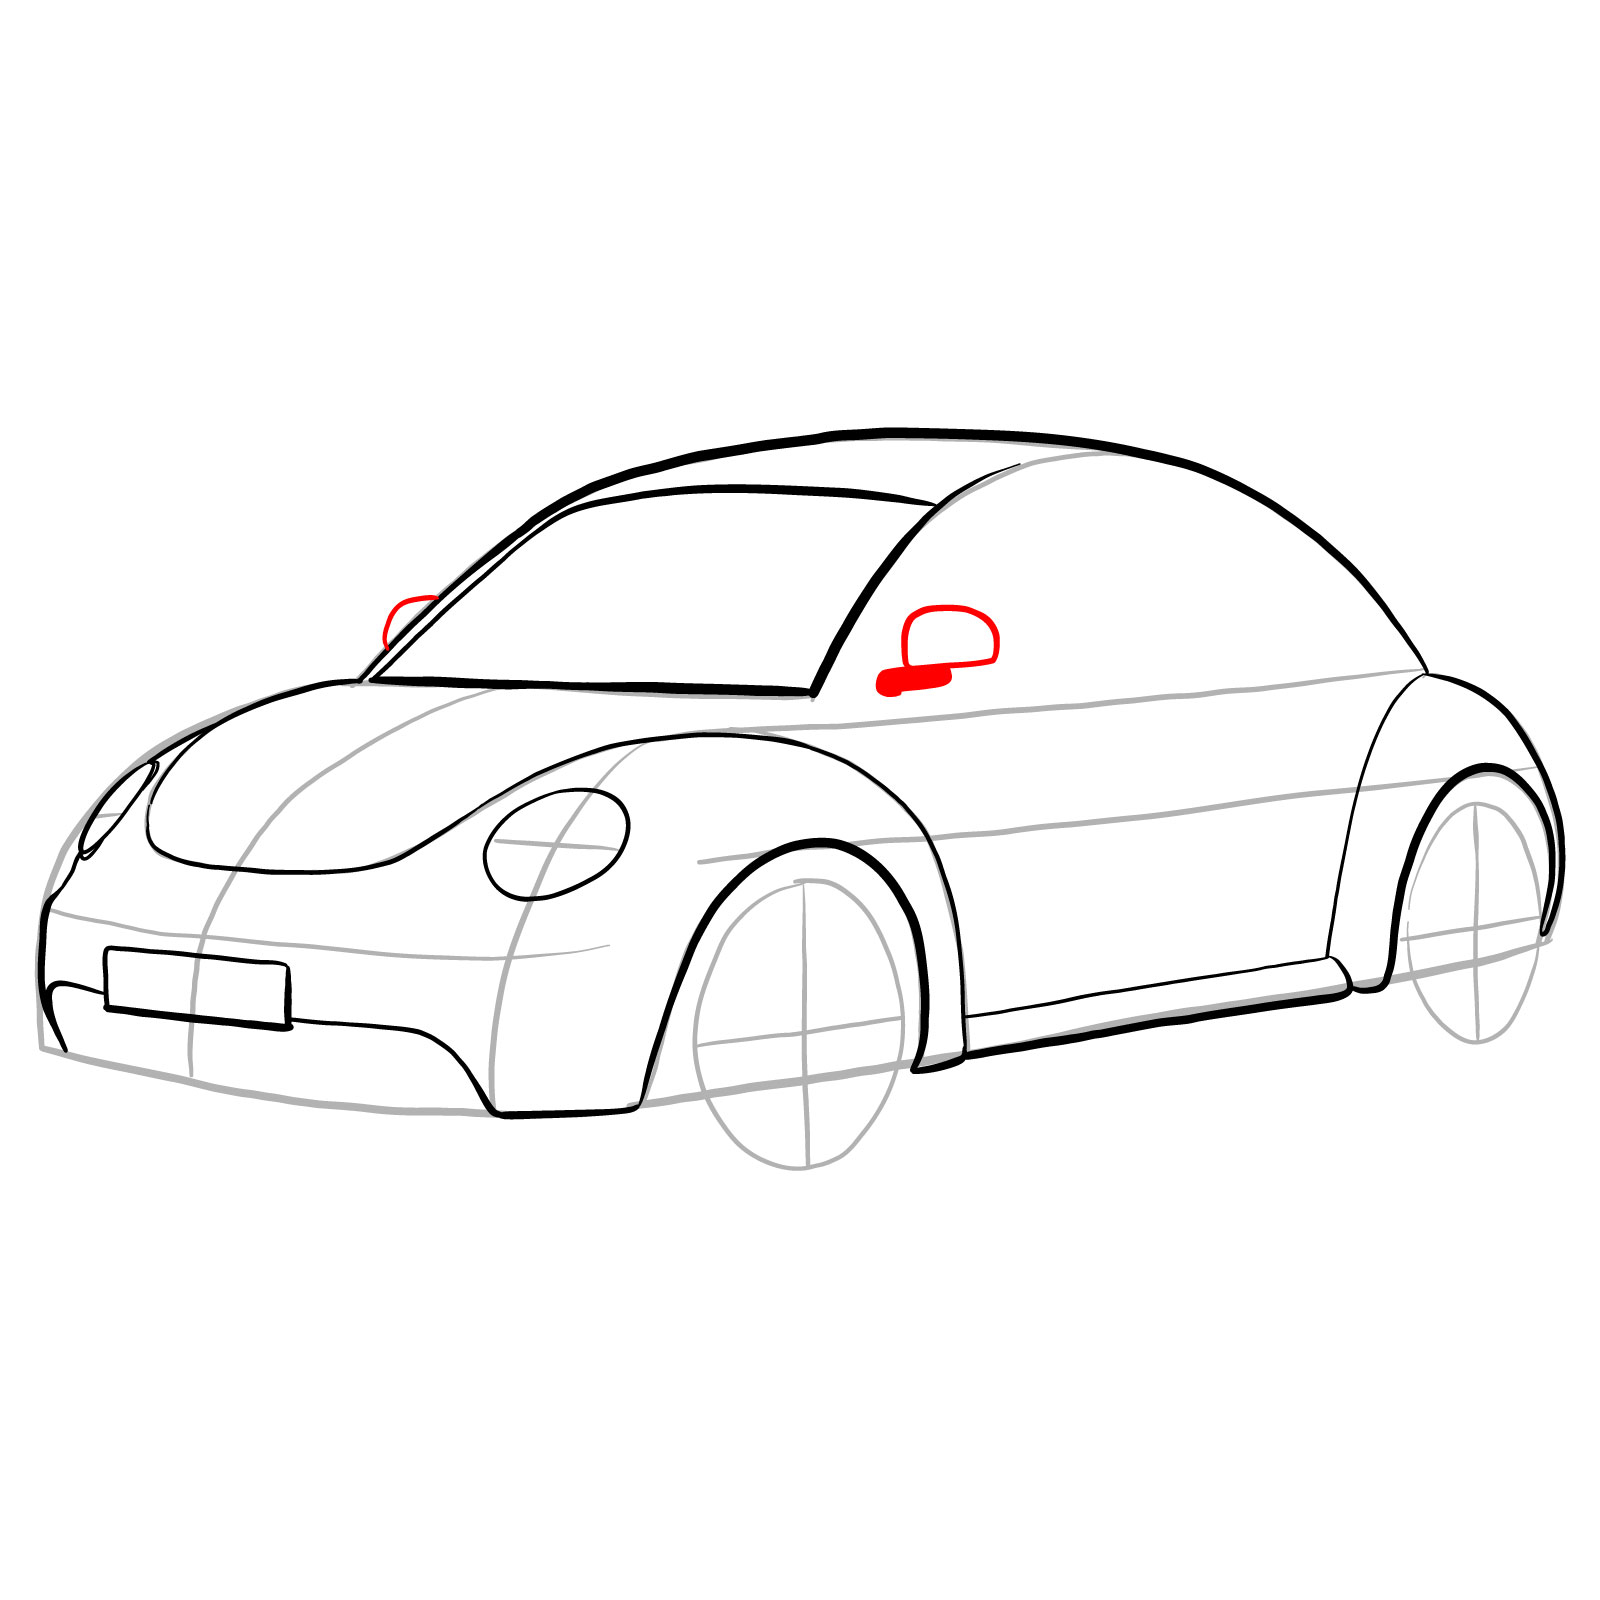 How to draw Volkswagen New Beetle - step 16